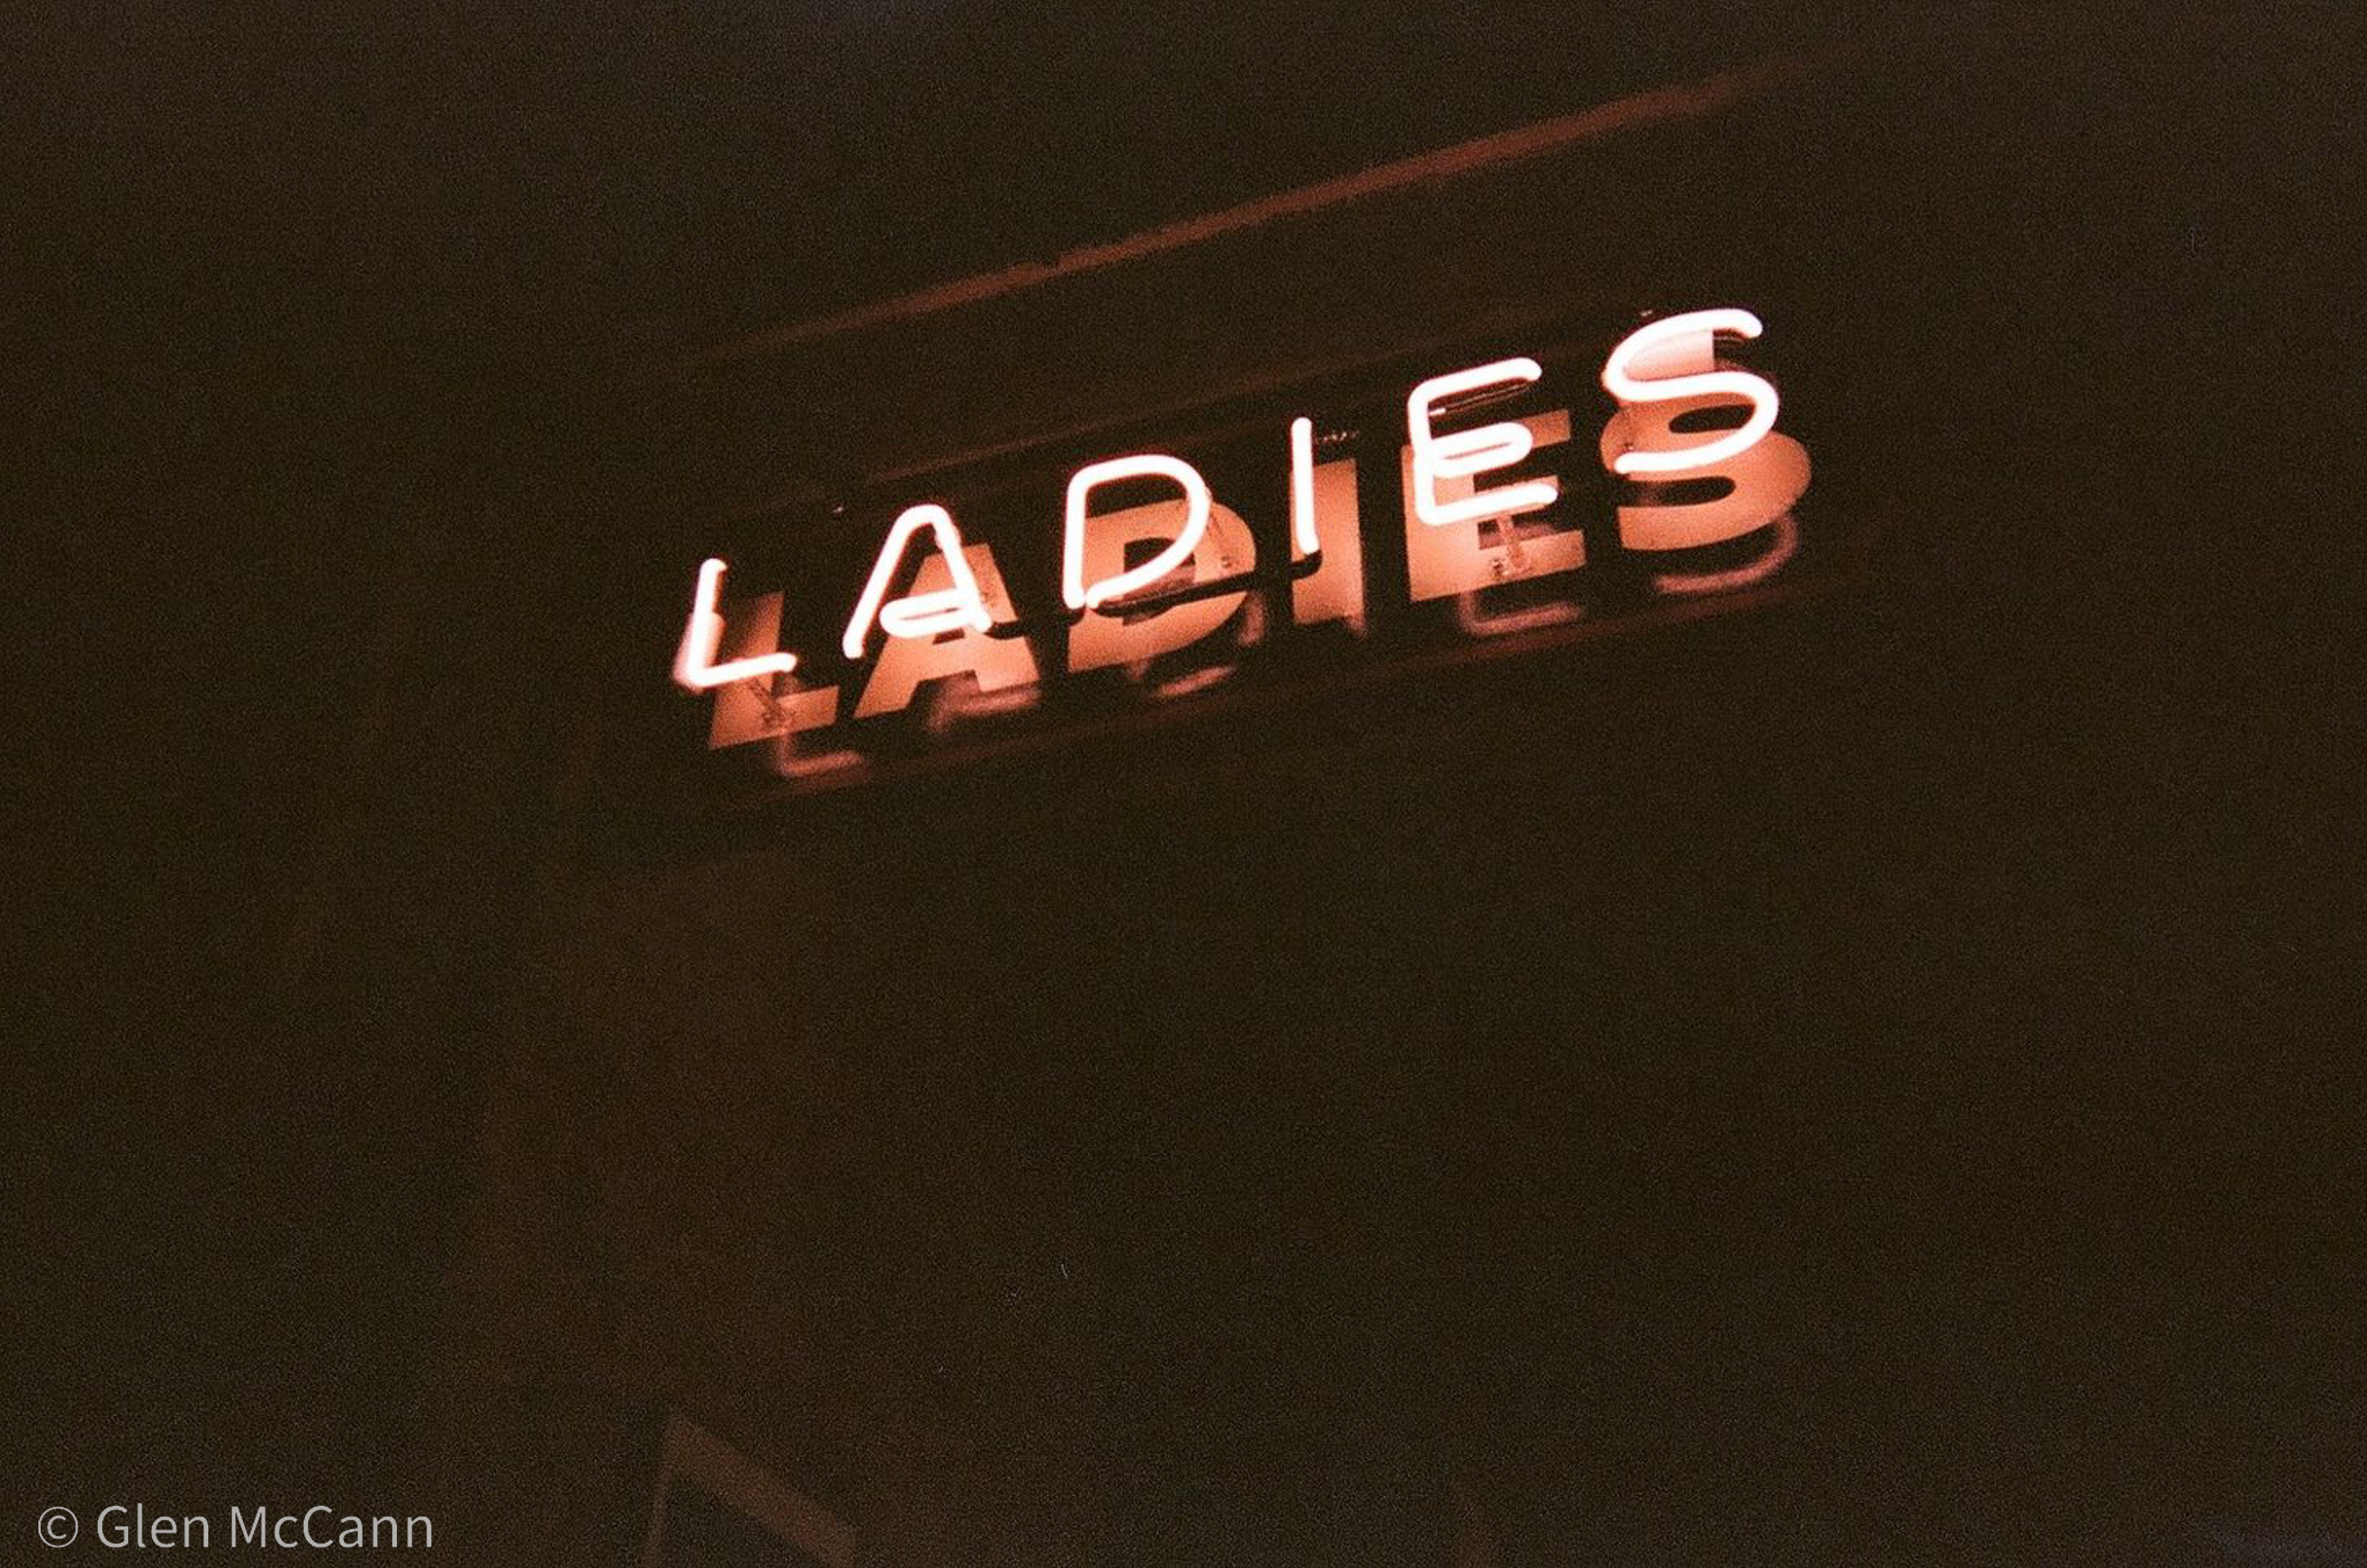 Film photo of a neon bathroom sign reading 'LADIES', the rest of the photo is too dark to make out.